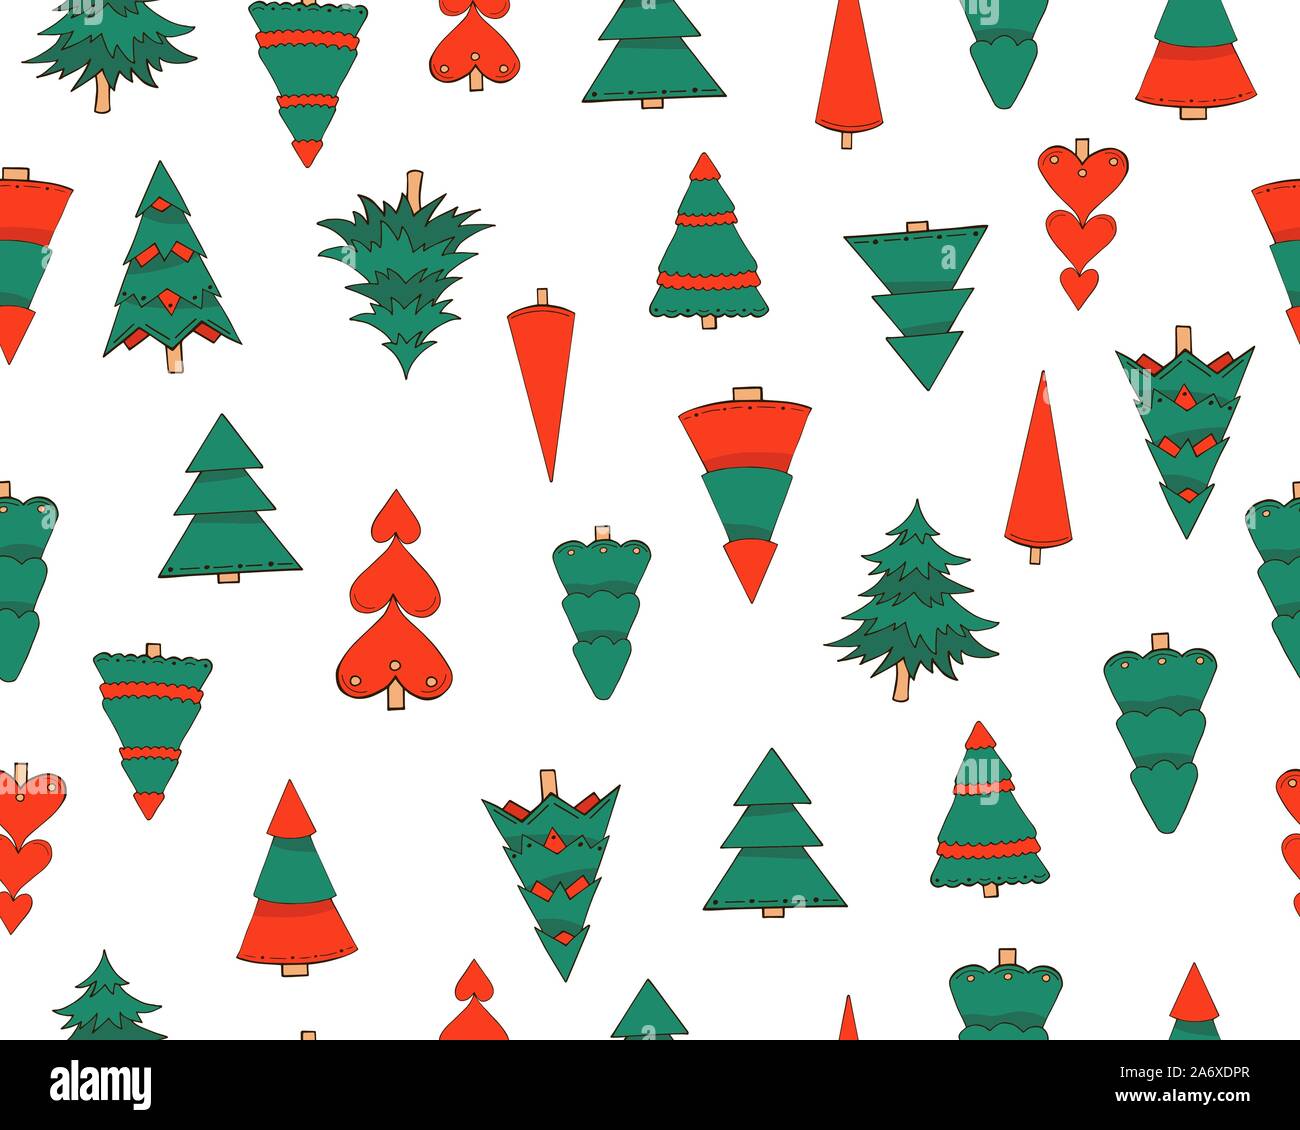 Vector seamless pattern with hand drawn Christmas trees in red and green colors isolated on white background. Endless texture. Wrapping paper, positiv Stock Vector